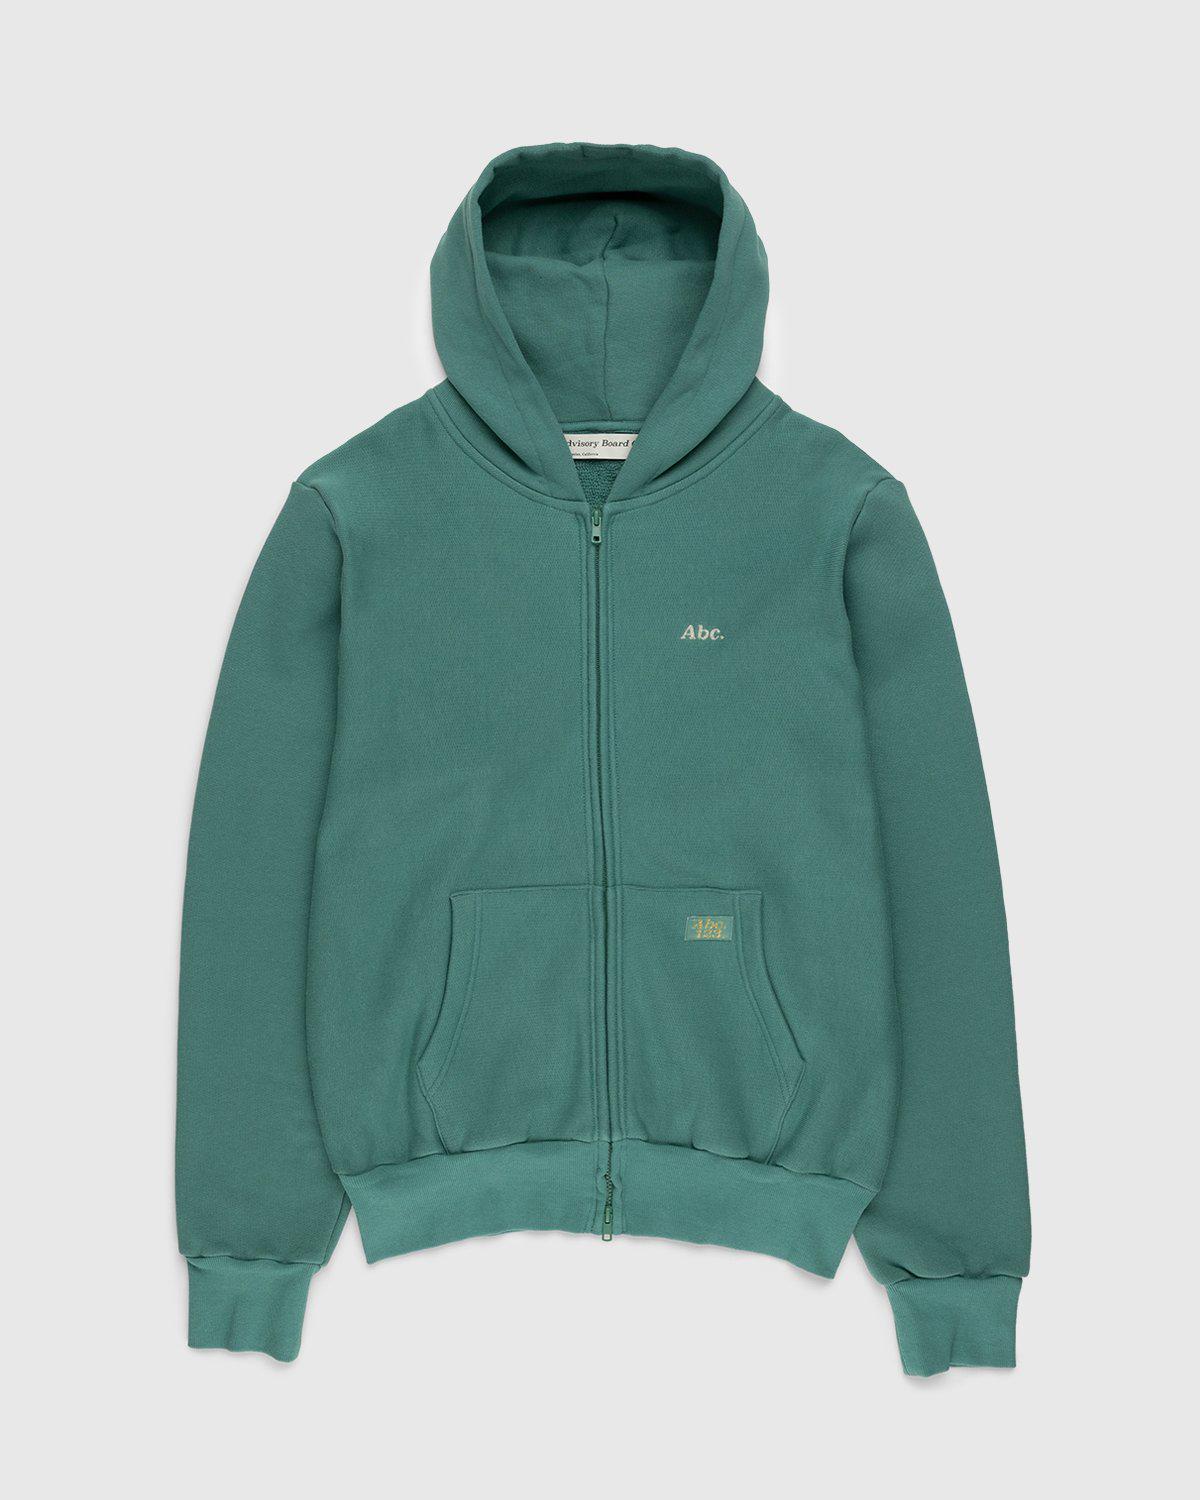 Abc. – Zip-Up French Terry Hoodie Apatite by ABC.